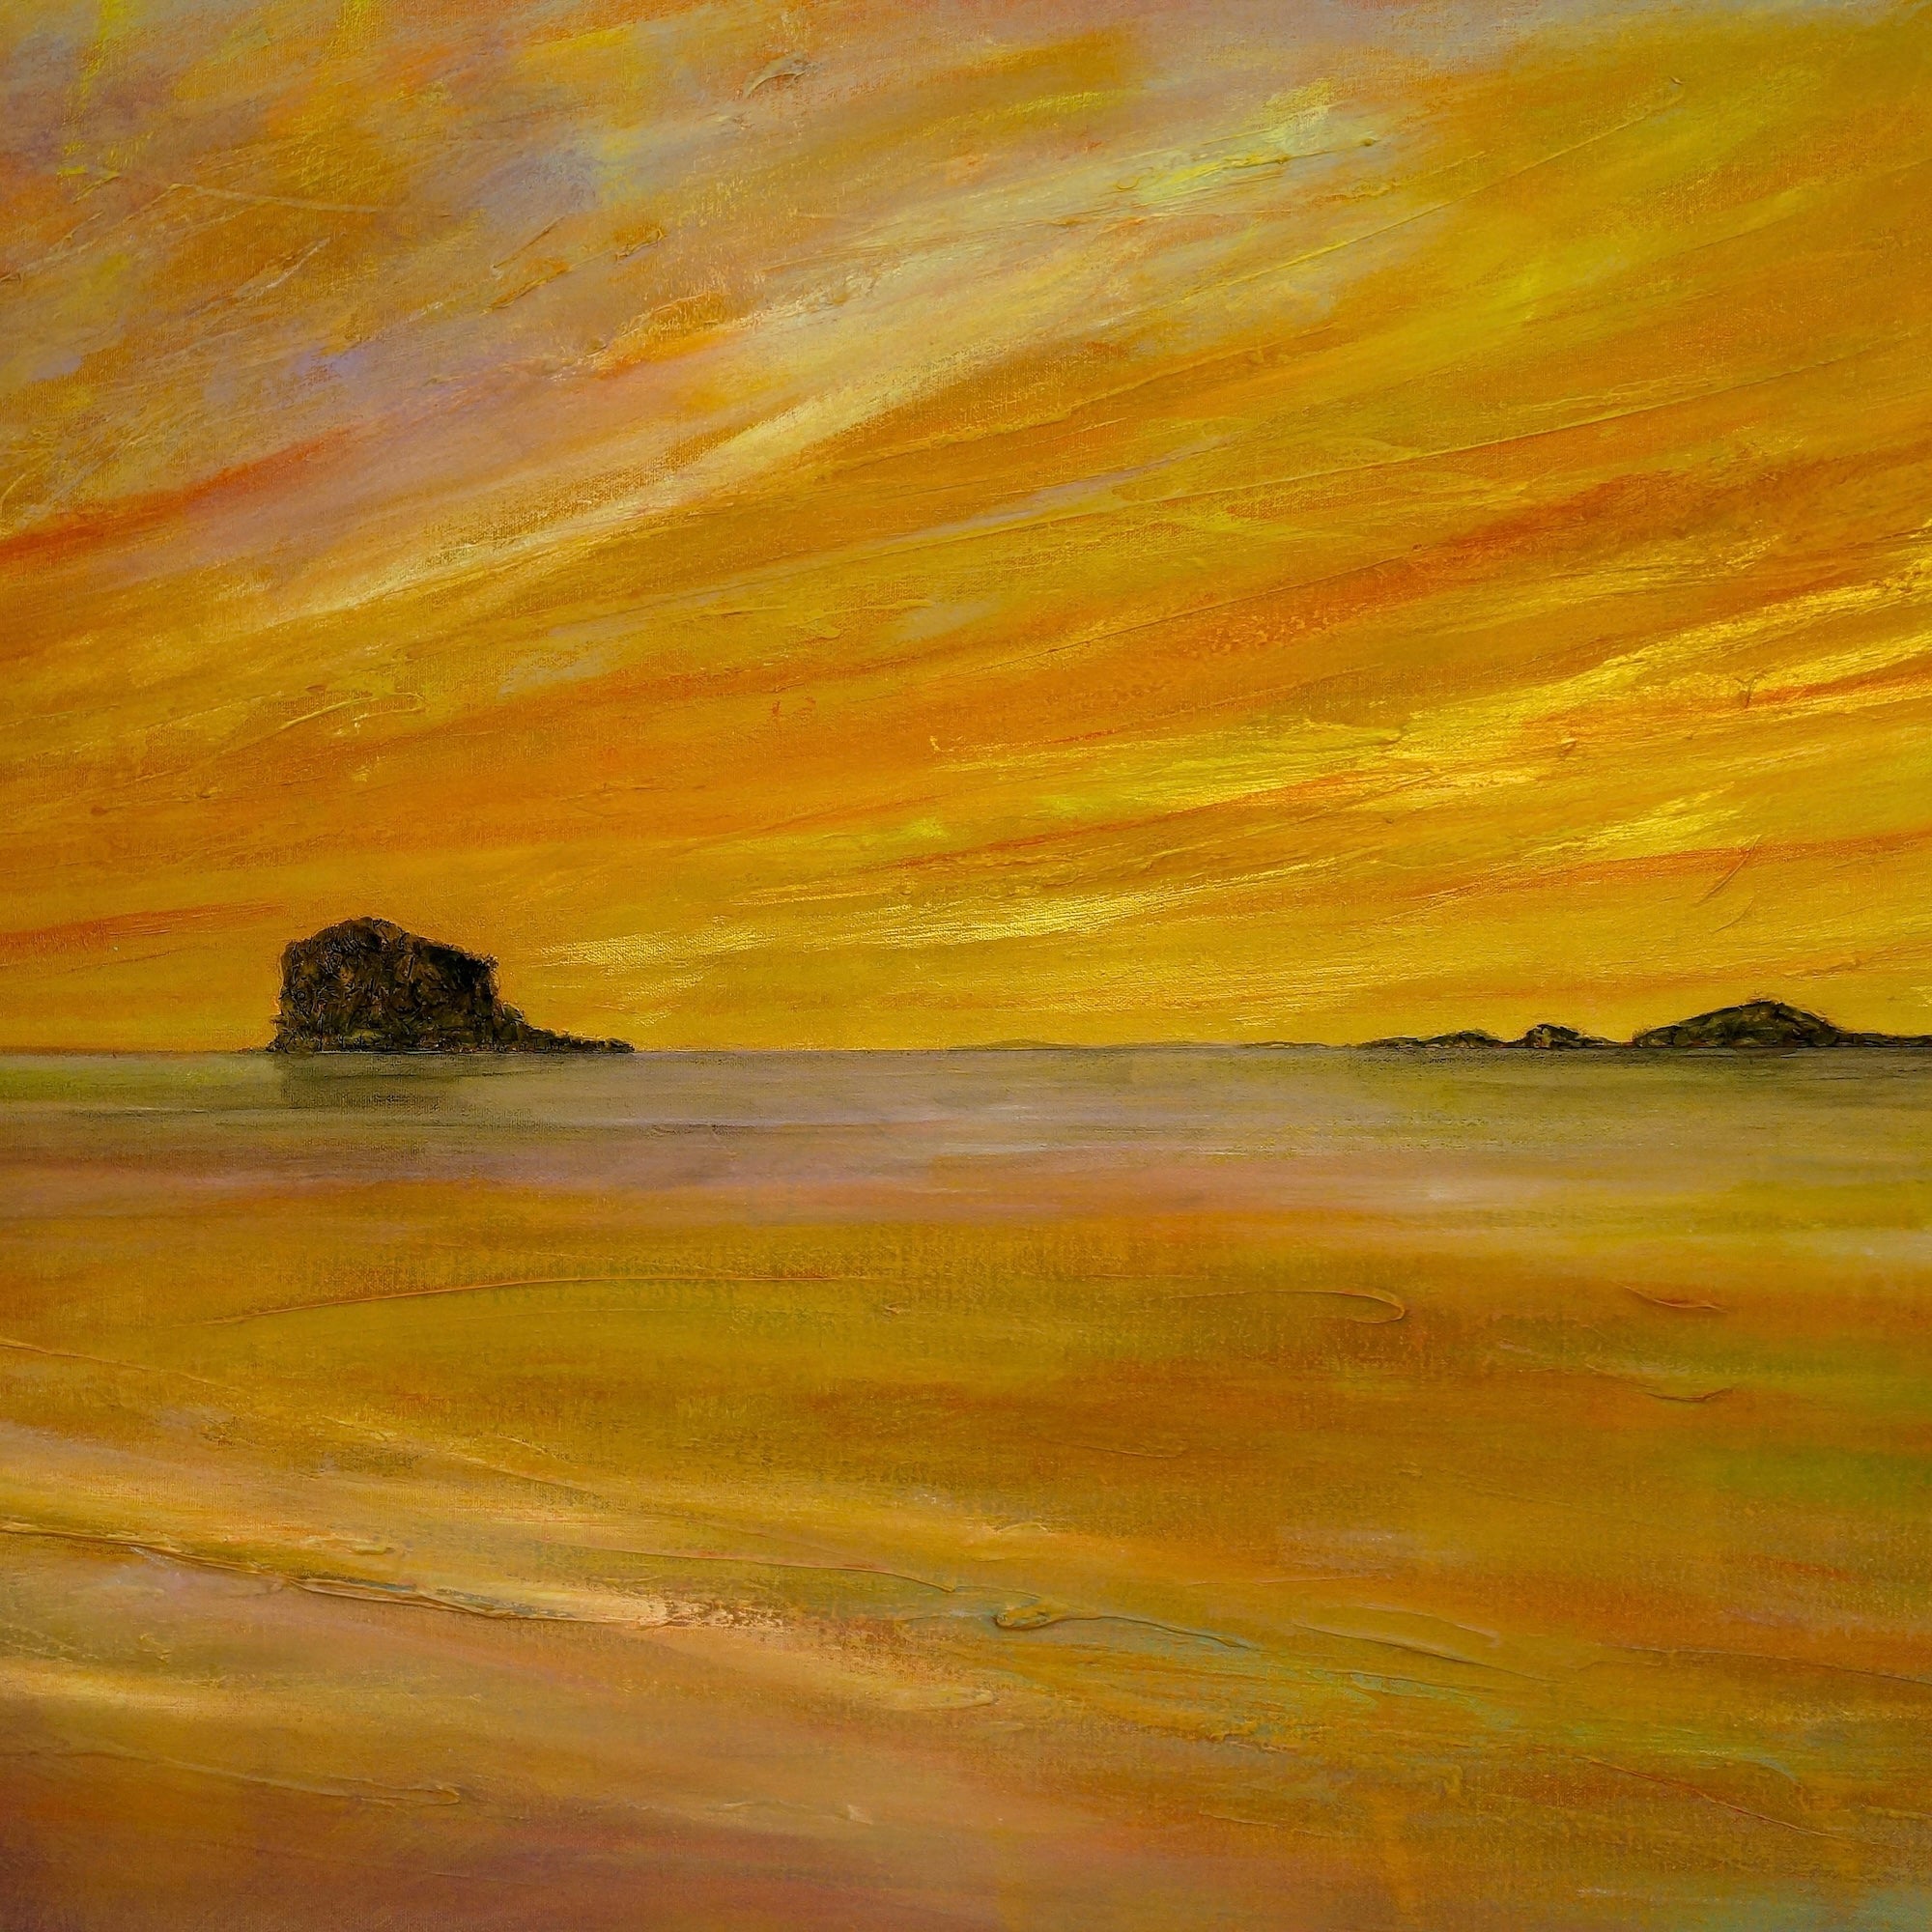 Bass Rock Dusk | Scotland In Your Pocket Art Print-Scotland In Your Pocket Framed Prints-Edinburgh & Glasgow Art Gallery-Mounted & Cello Bag: 12.5x12.5 cm-Black Frame-Paintings, Prints, Homeware, Art Gifts From Scotland By Scottish Artist Kevin Hunter